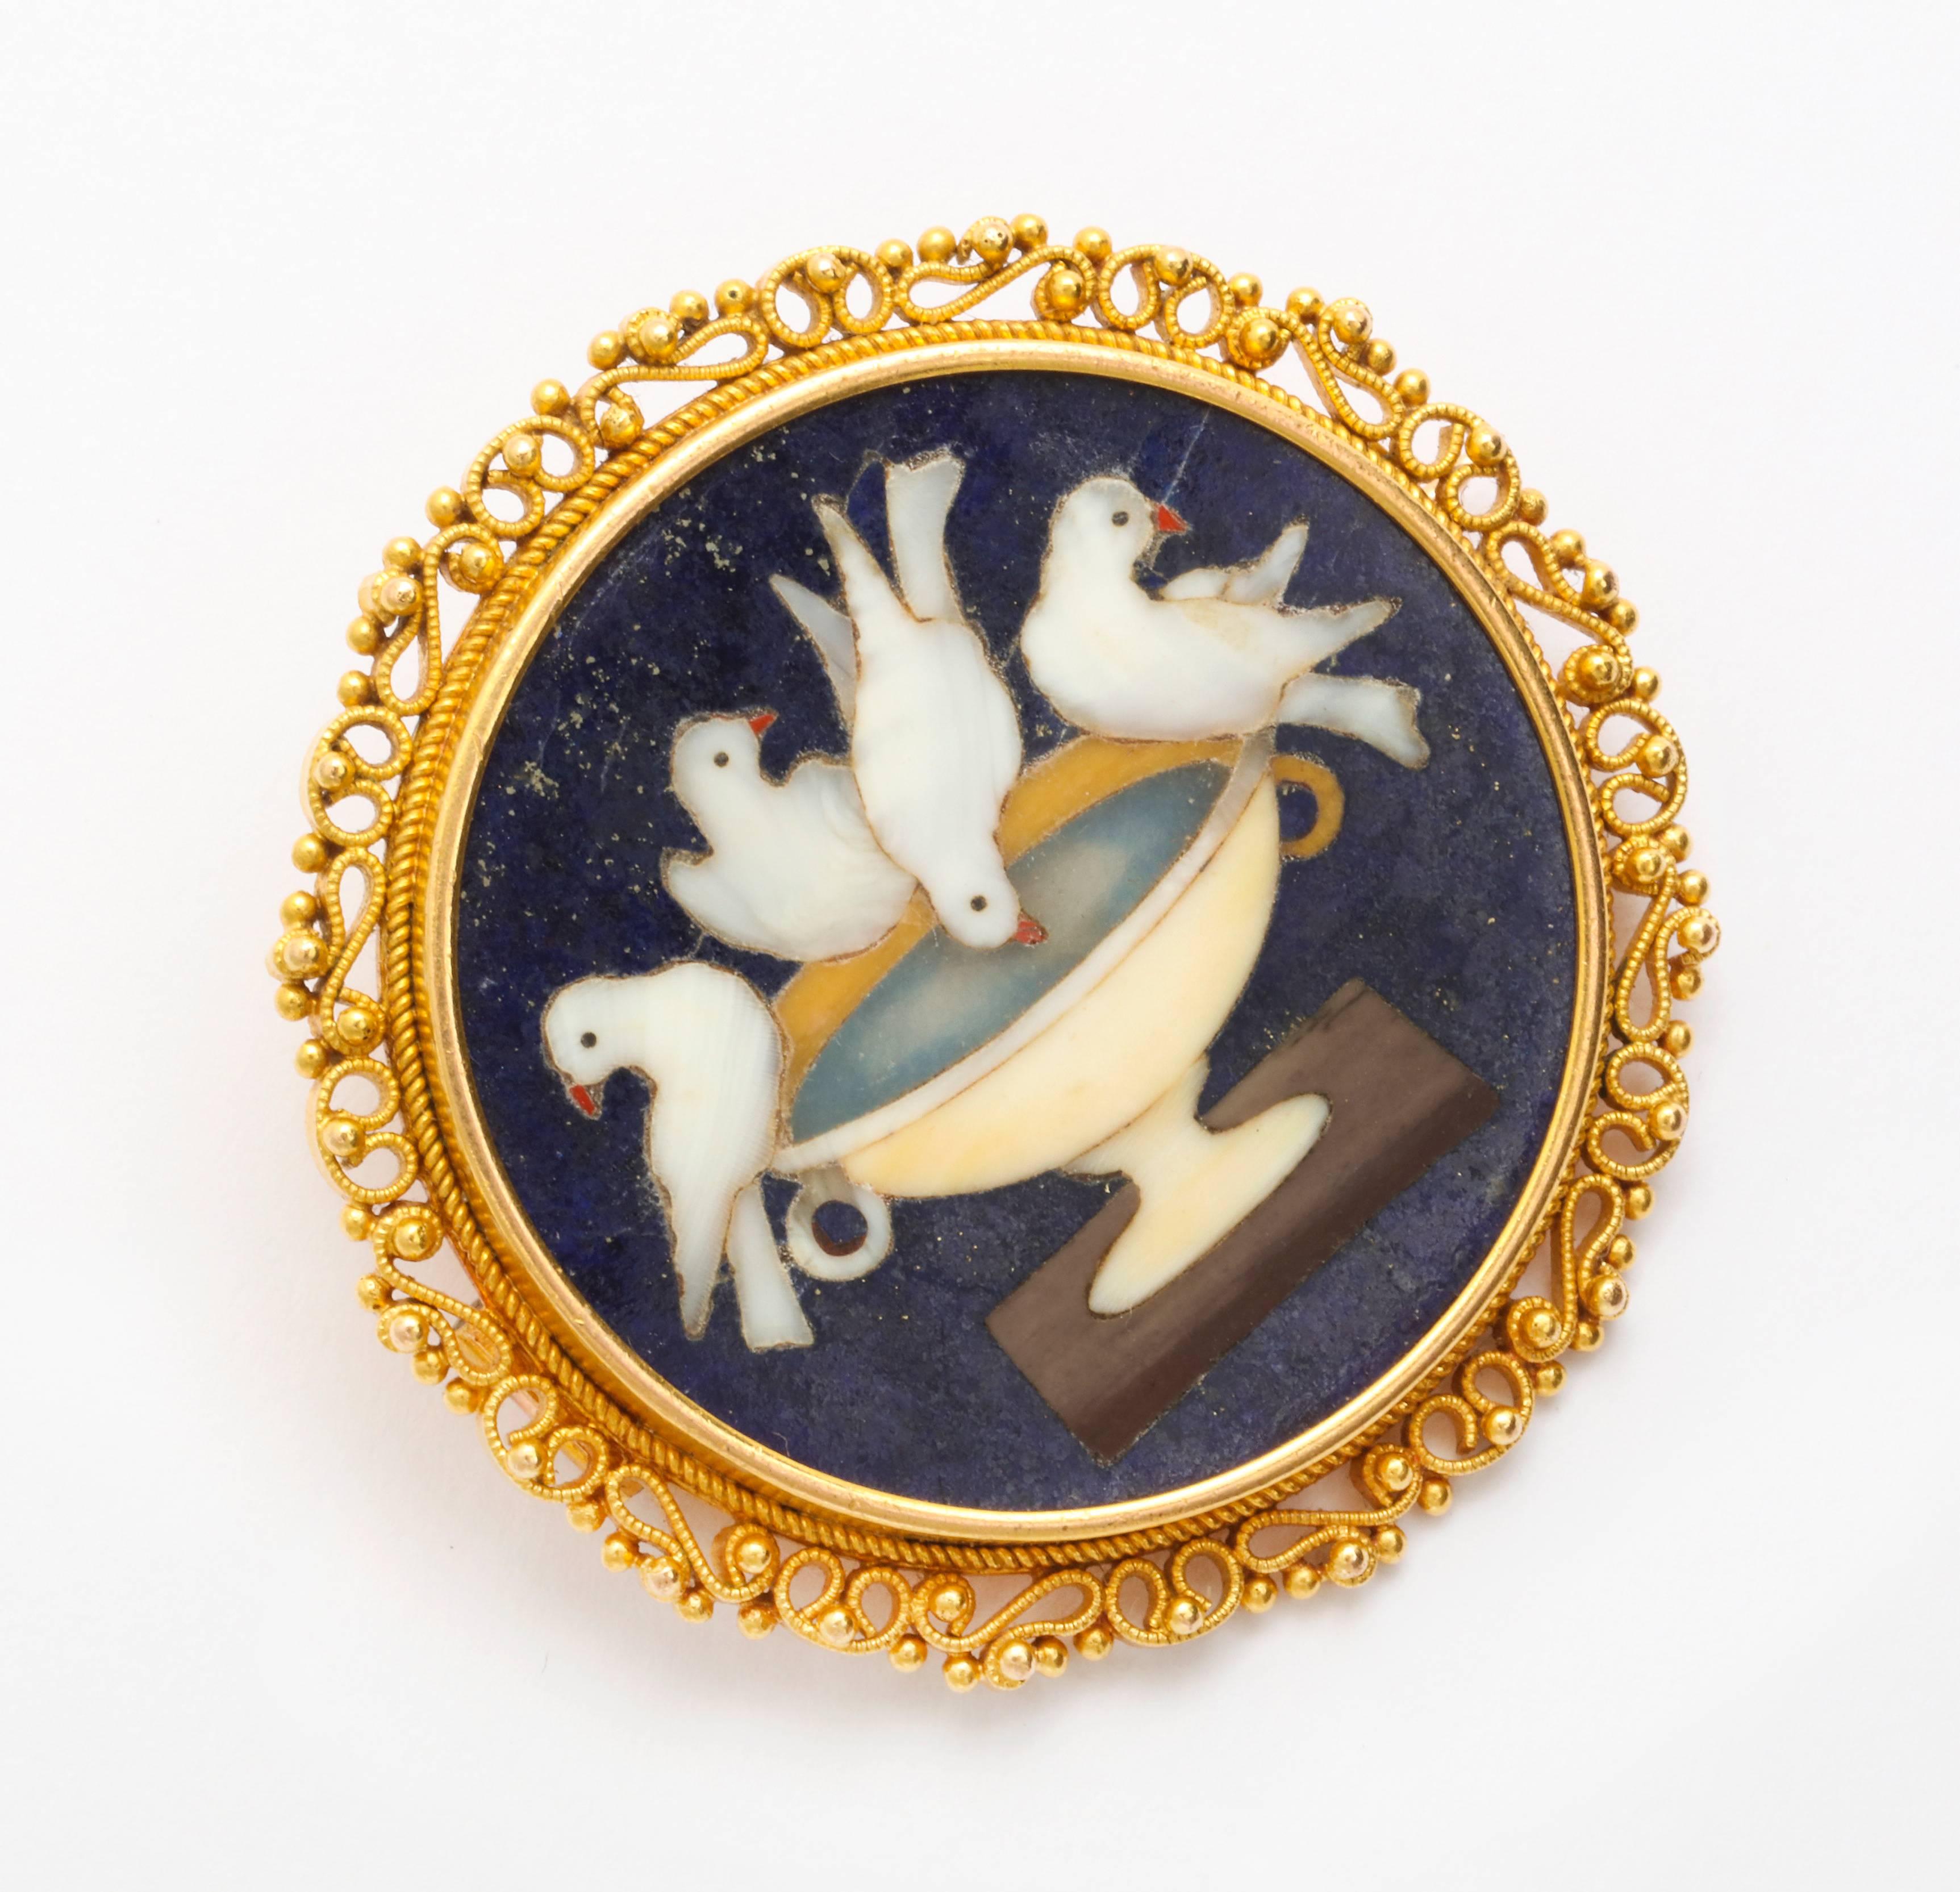 Run your finger over this brooch of the finest pietra dura mosaic imaginable and you will not feel the various stones as the artist was a genius. Take in the size of the eyes and dove beaks and the oh so subtle color gradations that make the birds